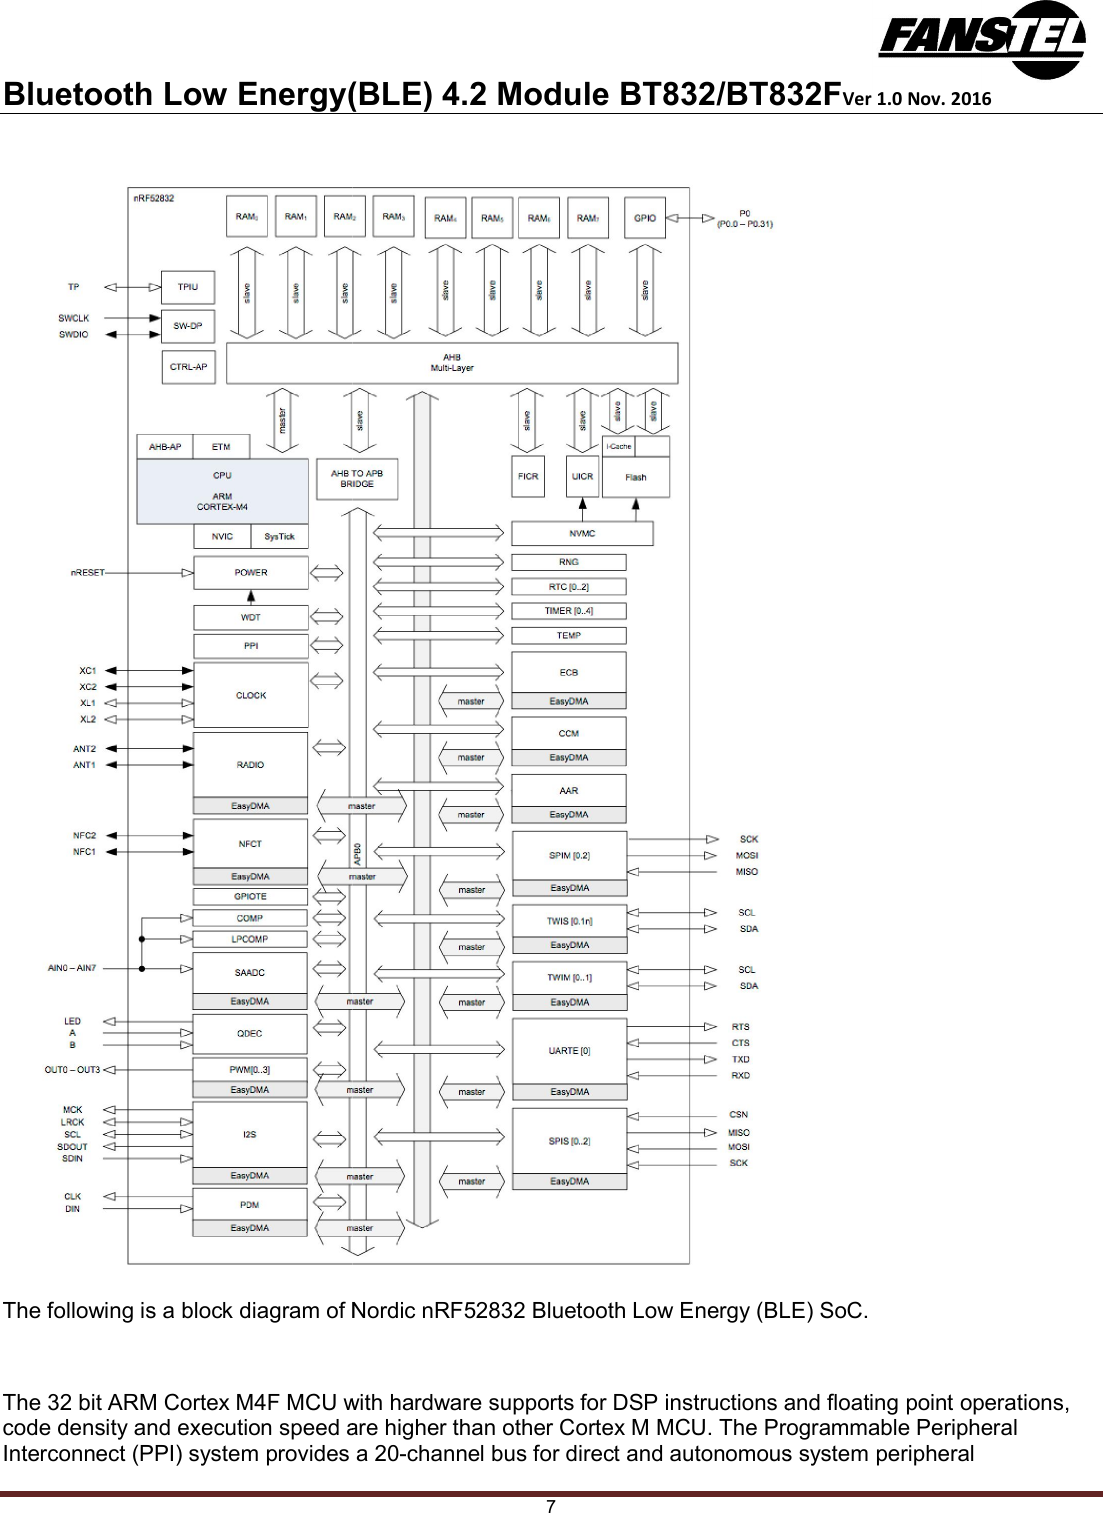 Bluetooth Low Energy(BLE)The following is a block diagram of Nordic The 32 bit ARM Cortex M4F MCU withcode density and execution speed areInterconnect (PPI) system provides Energy(BLE) 4.2 Module BT832/BT832F7 Nordic nRF52832 Bluetooth Low Energy (BLE)with hardware supports for DSP instructions andare higher than other Cortex M MCU. The Programmable a 20-channel bus for direct and autonomousBT832/BT832FVer 1.0 Nov. 2016 (BLE) SoC. and floating point operations, Programmable Peripheral s system peripheral 